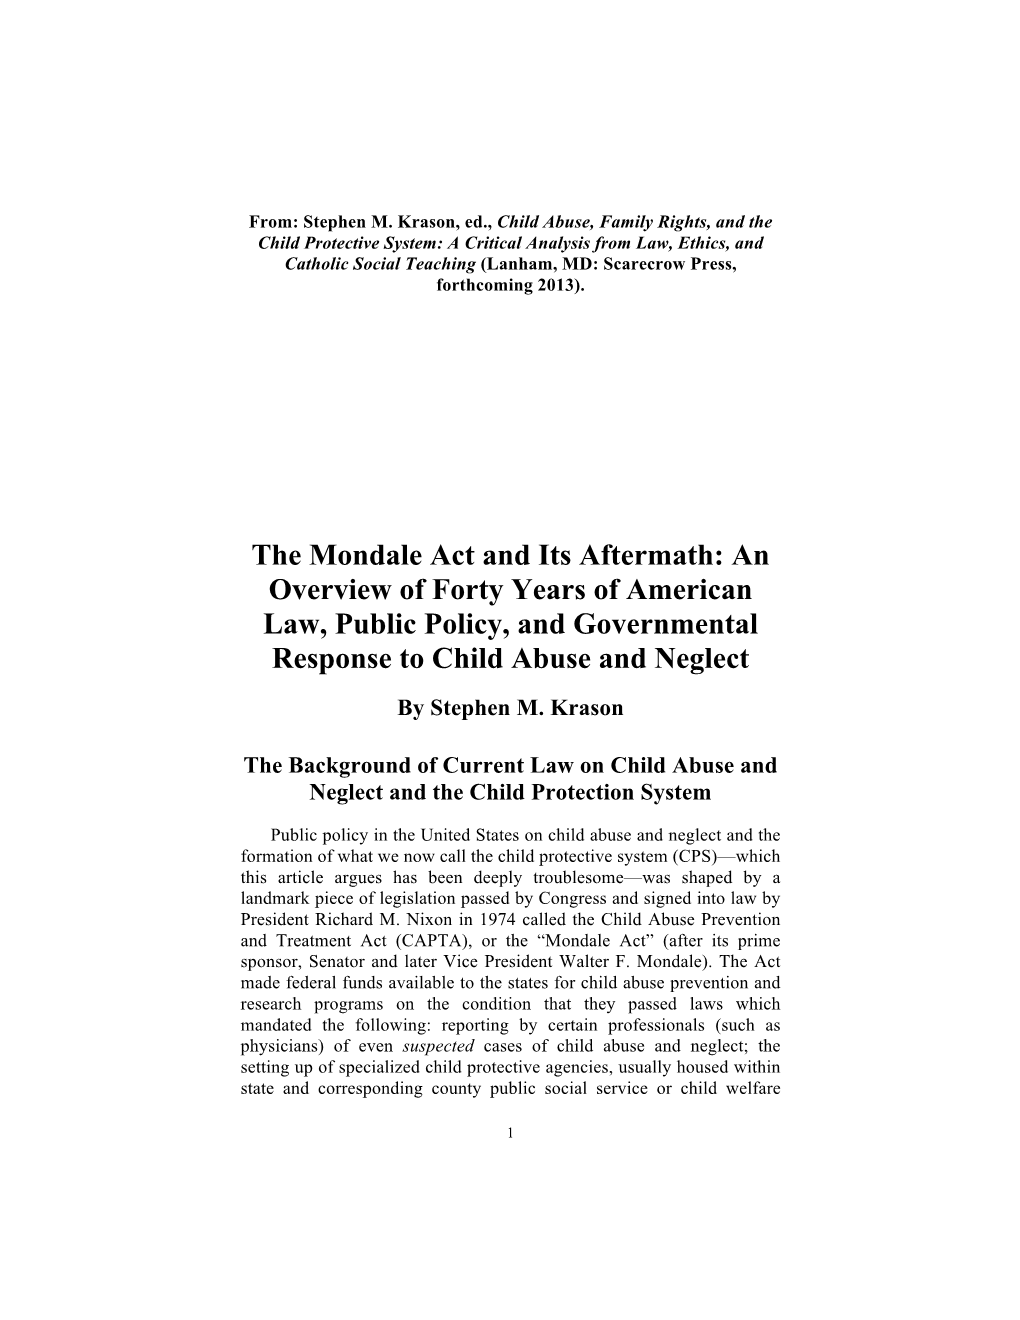 Mondale Act After Forty Years (True)